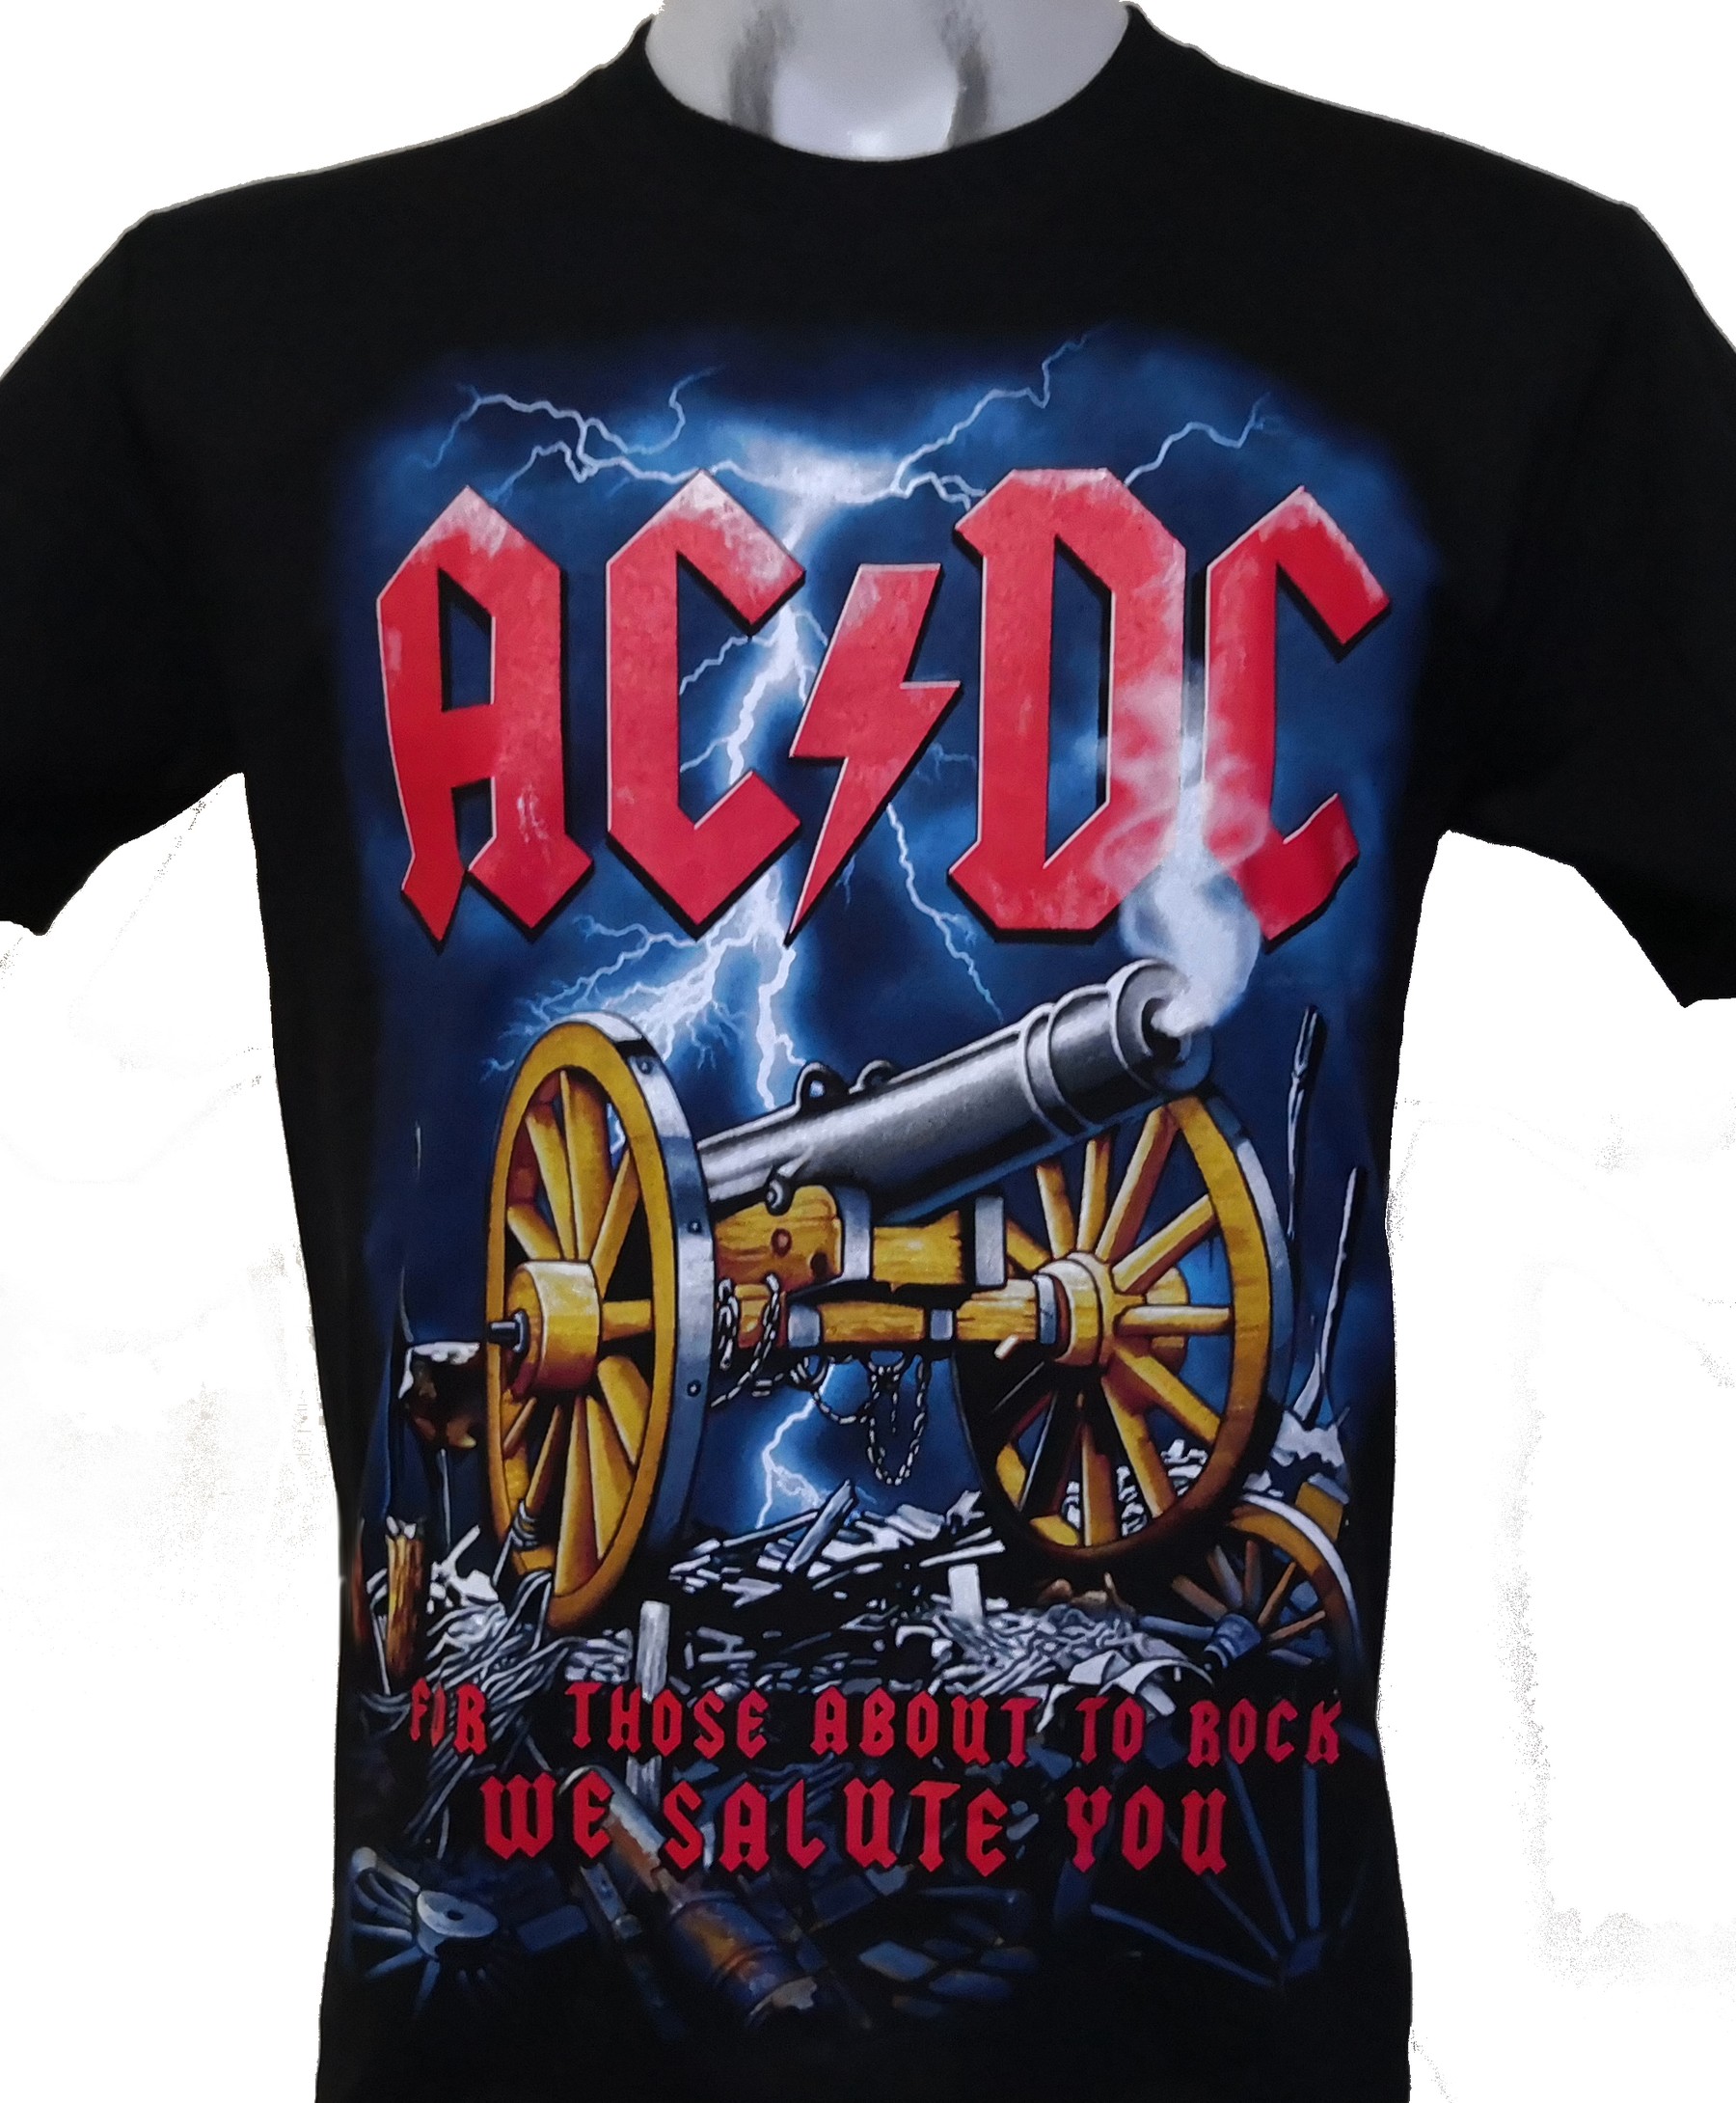 AC/DC t-shirt For – RoxxBKK About Rock size Those M To